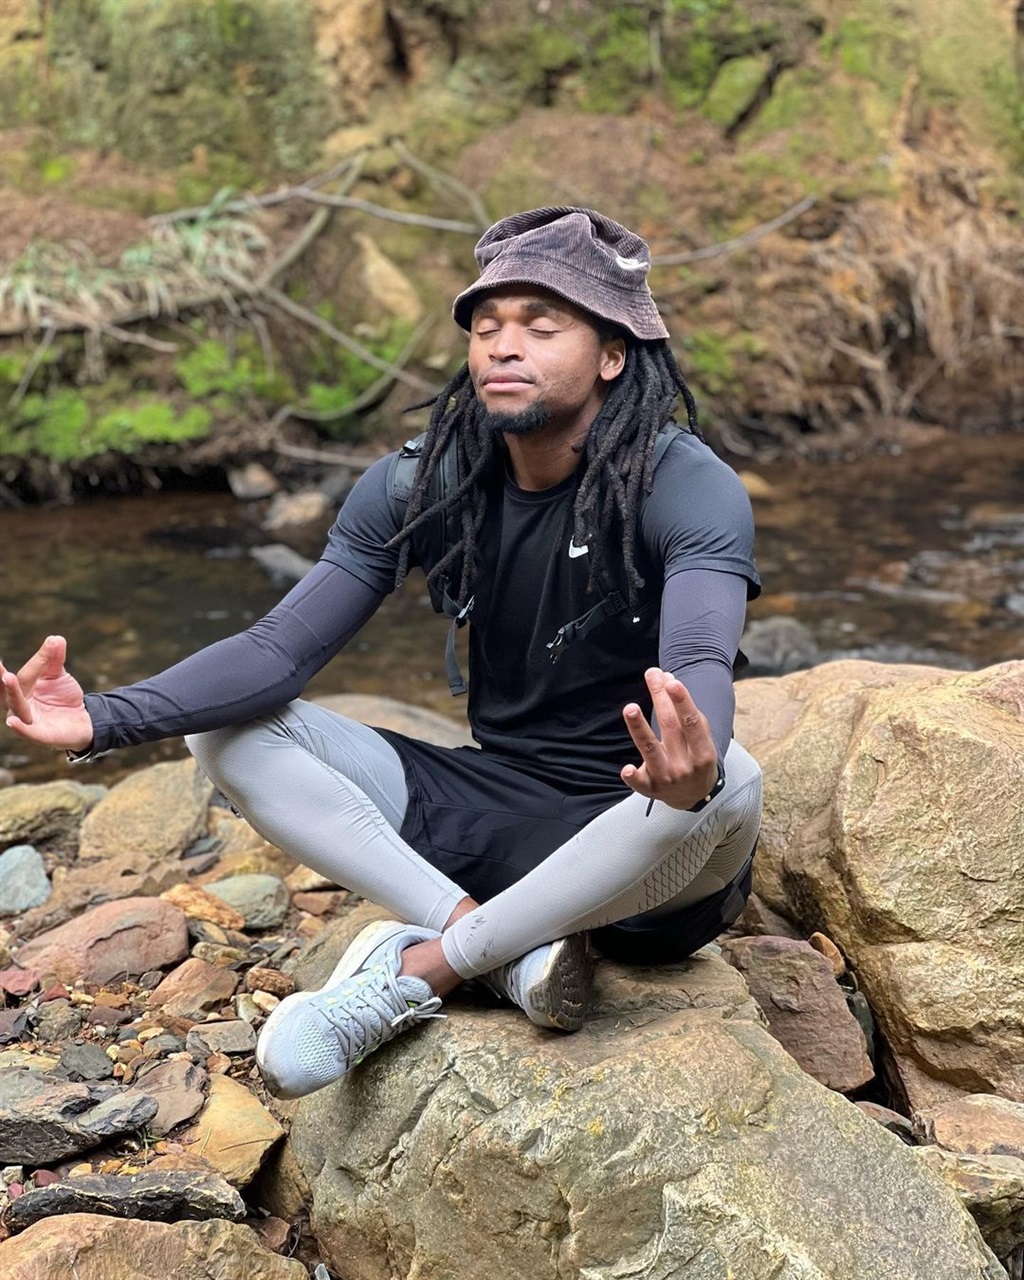 Siphiwe Tshabalala visited a scenic hiking trail over the weekend. 